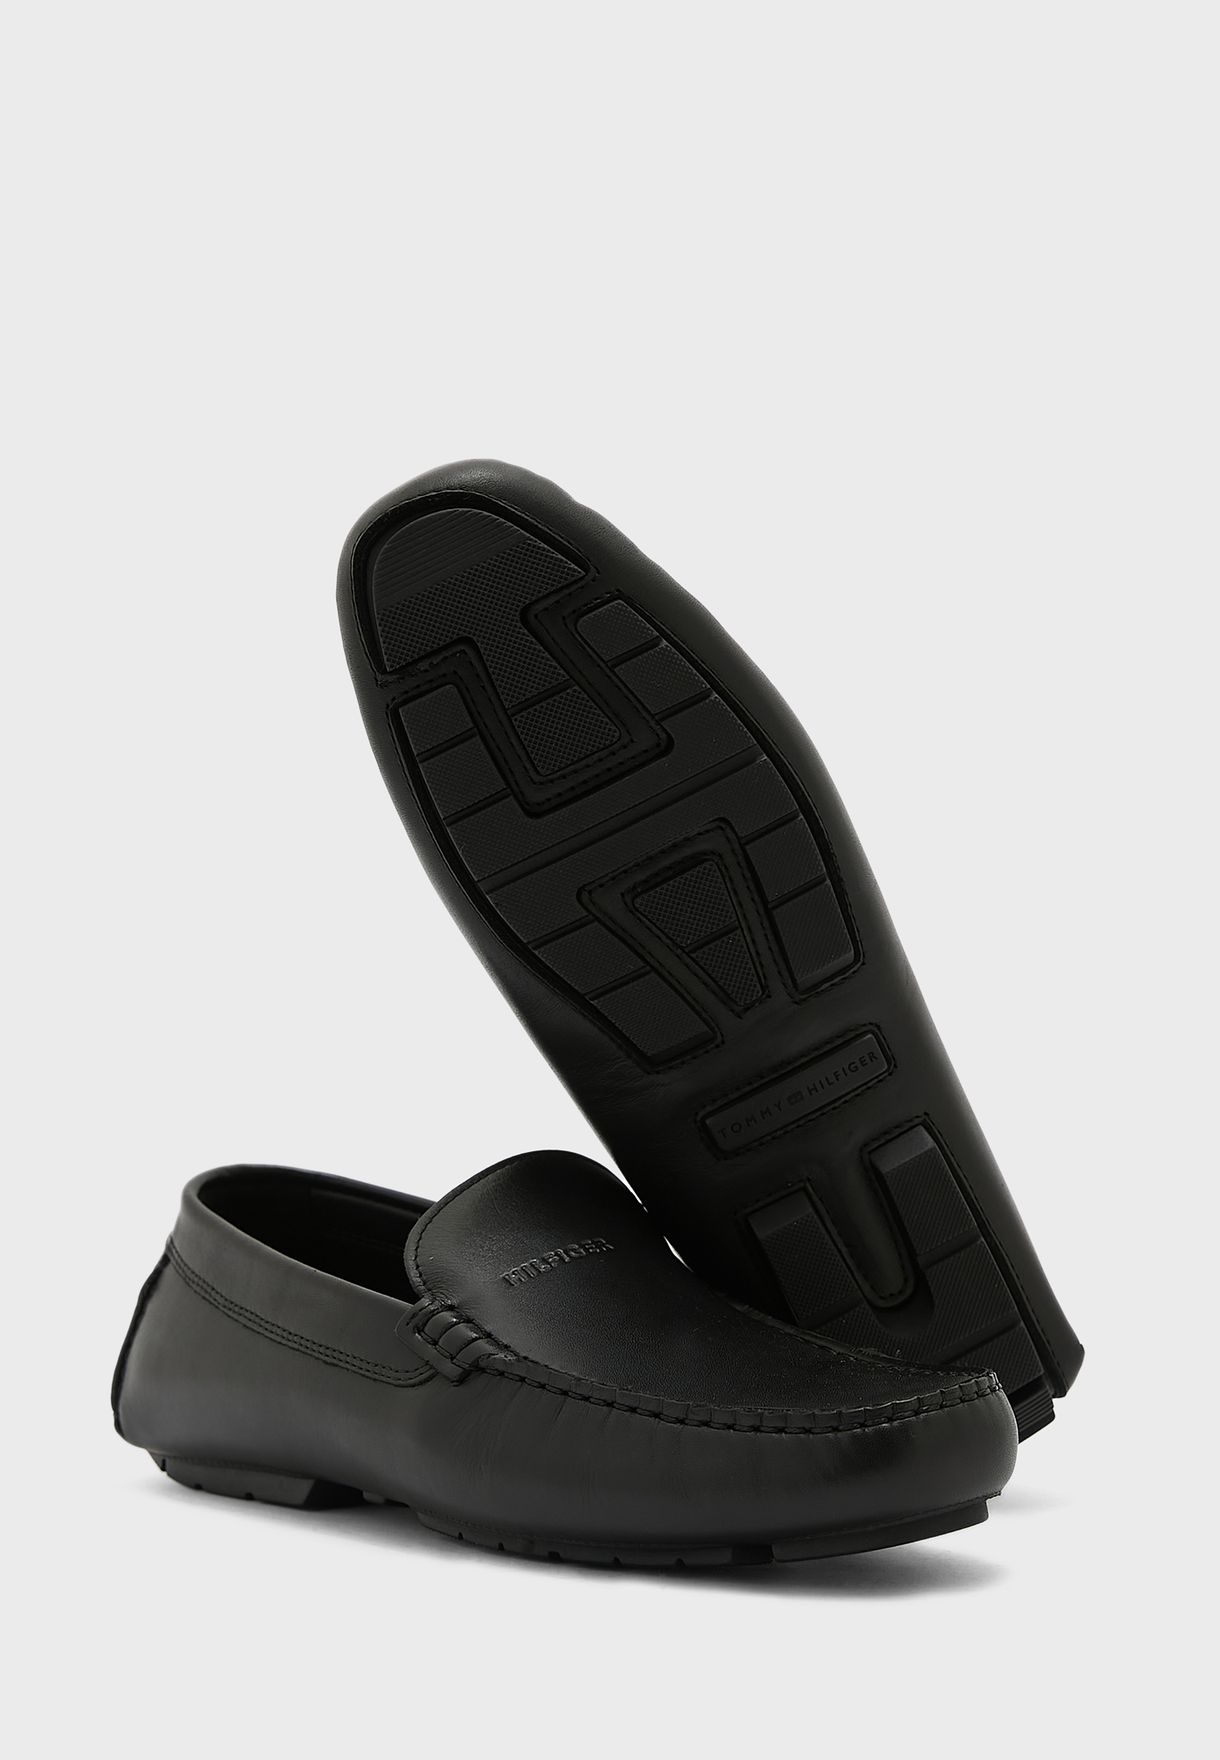 Iconic Loafers